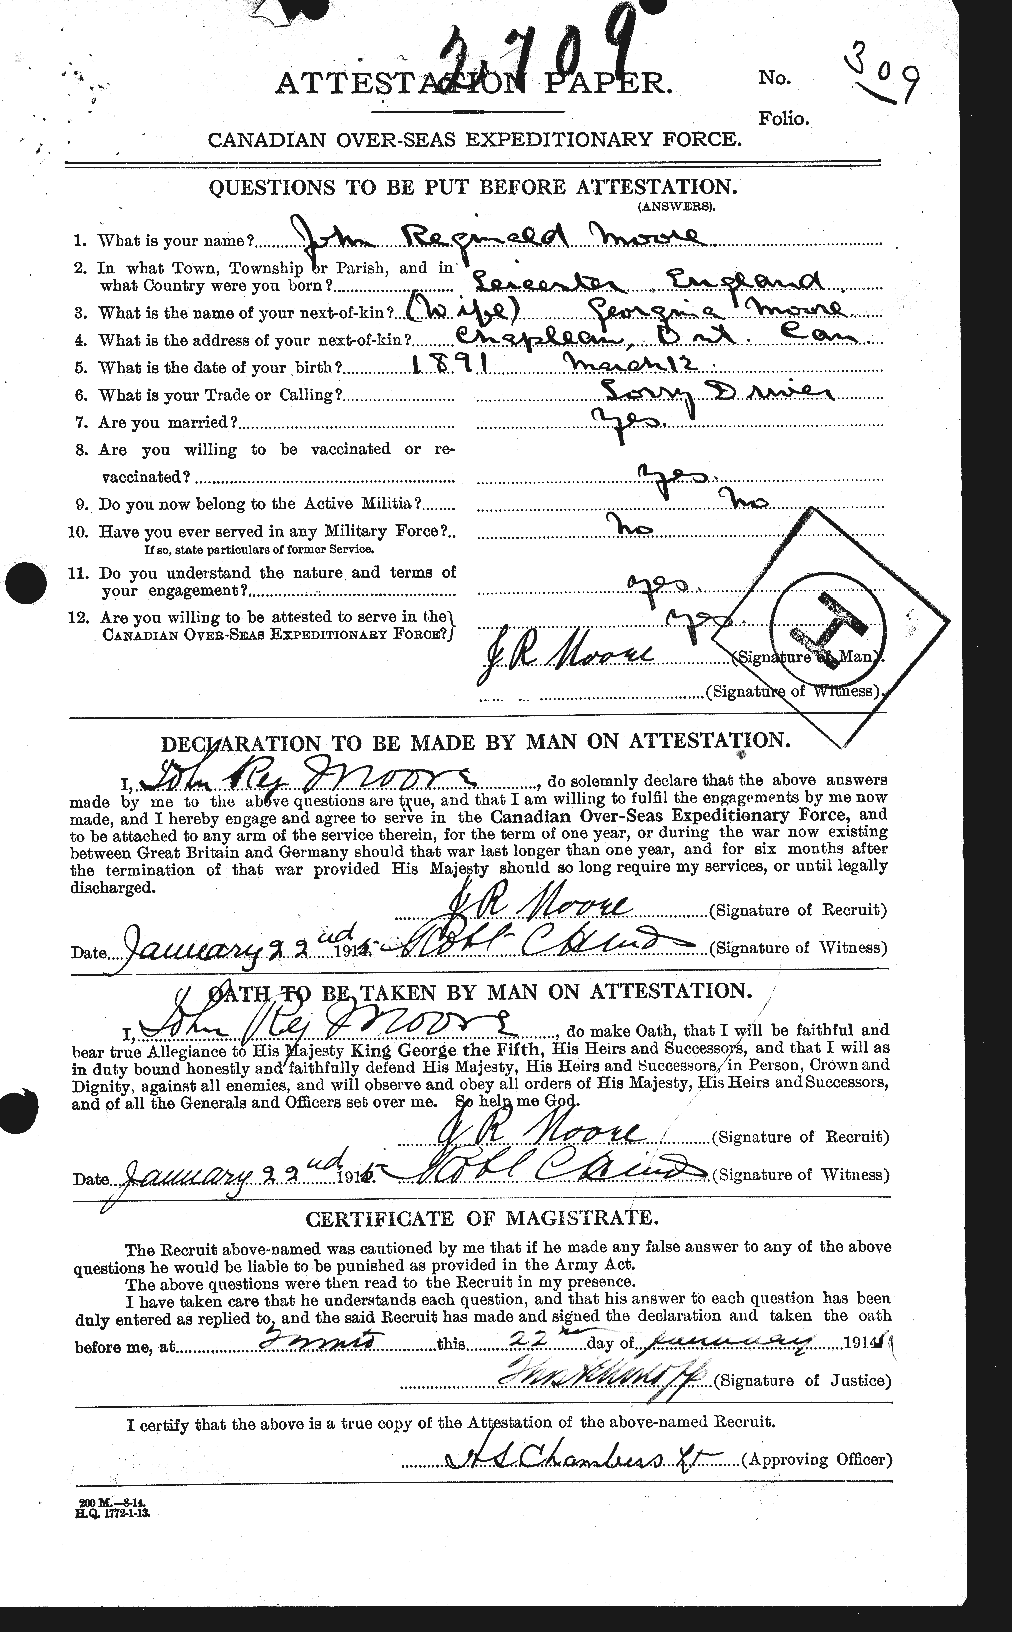 Personnel Records of the First World War - CEF 503324a